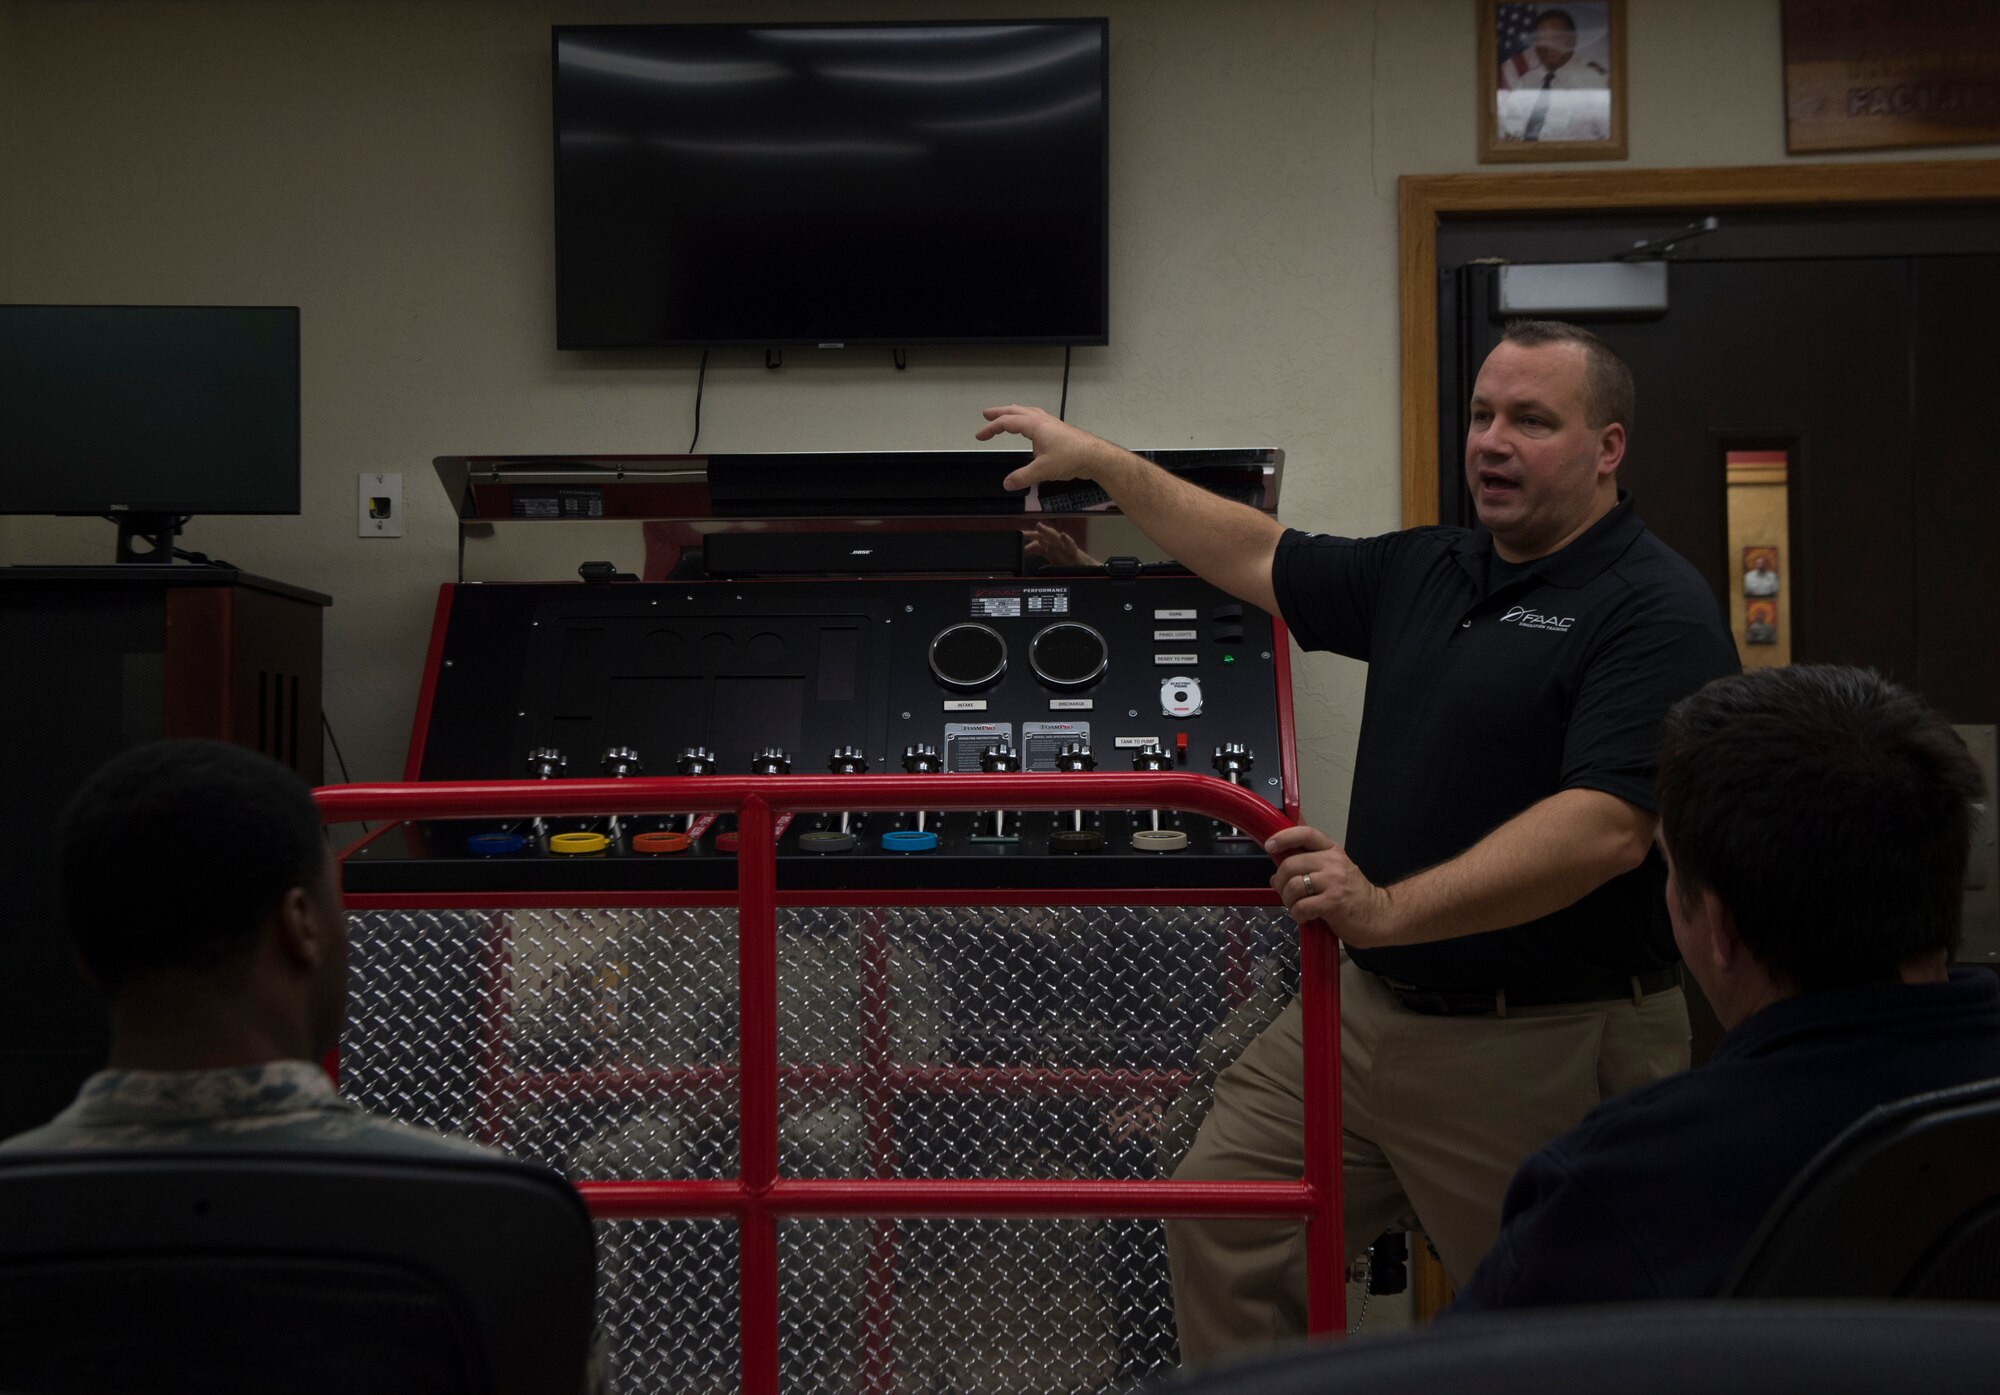 Phil Duczyminski, a subject matter specialist for FAAC, a firefighting simulation company, talks to the 97th Air Mobility Wing Fire Department about how to operate their new pump operations simulator, Nov. 20, 2018, Altus Air Force Base, Okla. This is one of three simulators the fire department is receiving to help make training easier and more efficient. (U.S. Air Force photo by Airman First Class Jeremy Wentworth)